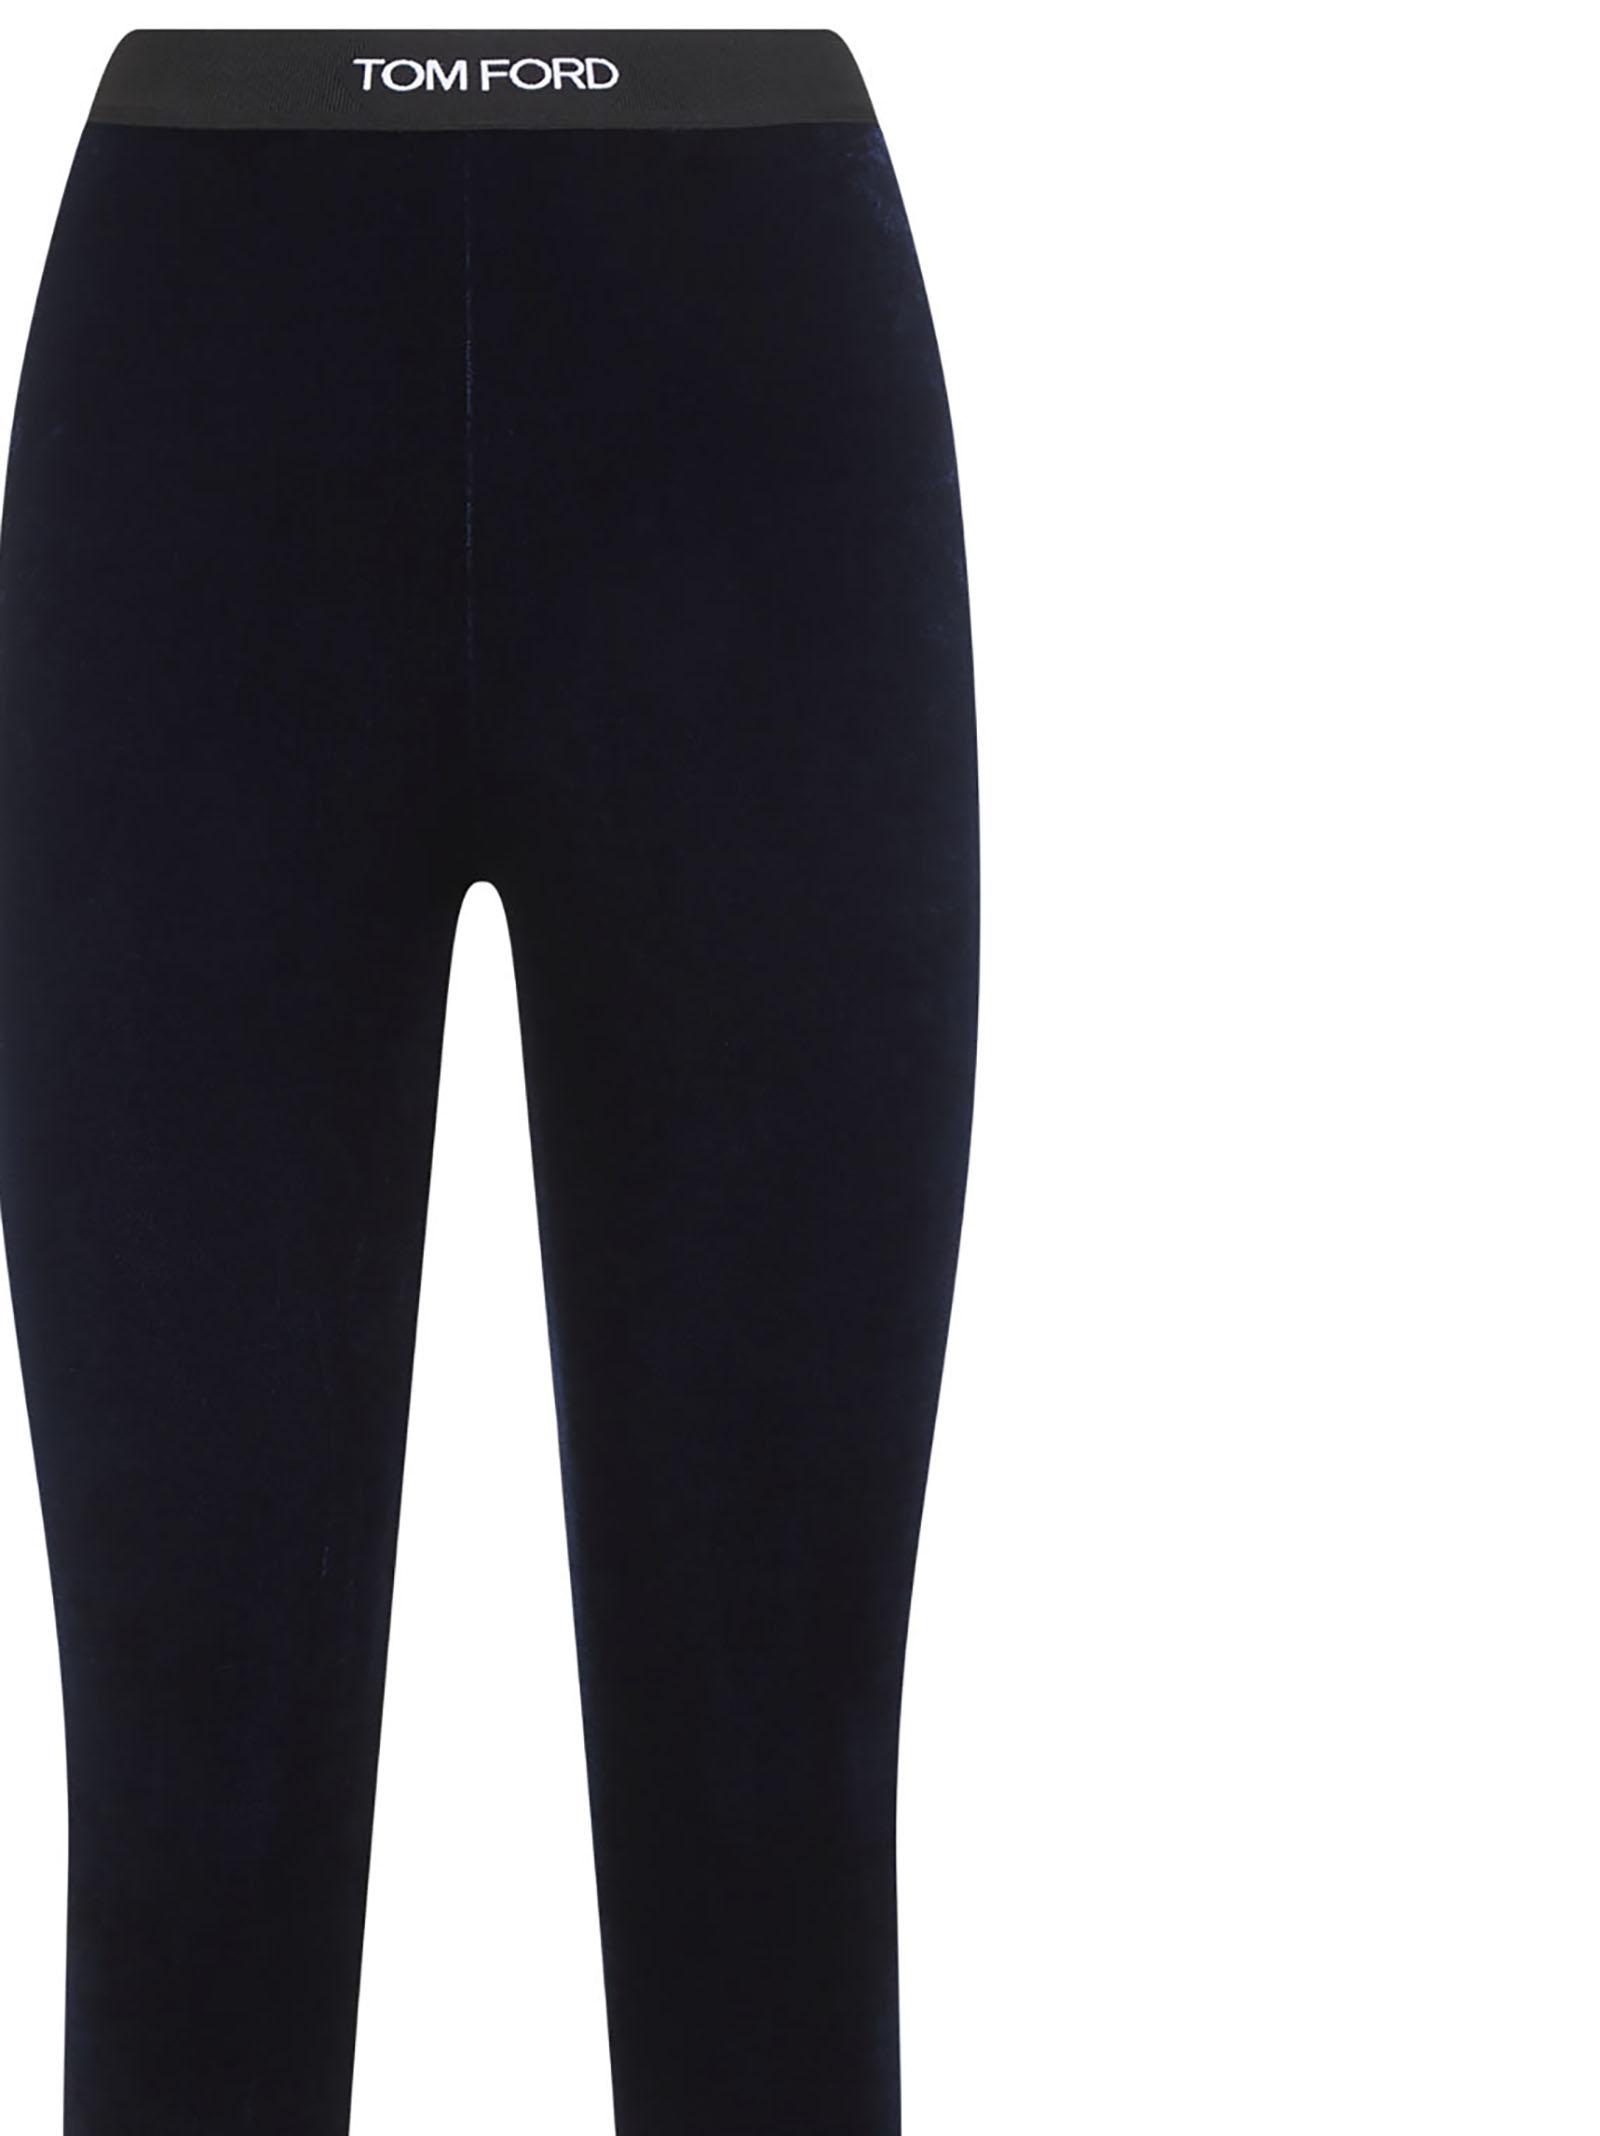 Tom Ford Cashmere Leggings in Blue Slacks and Chinos Leggings Womens Clothing Trousers 